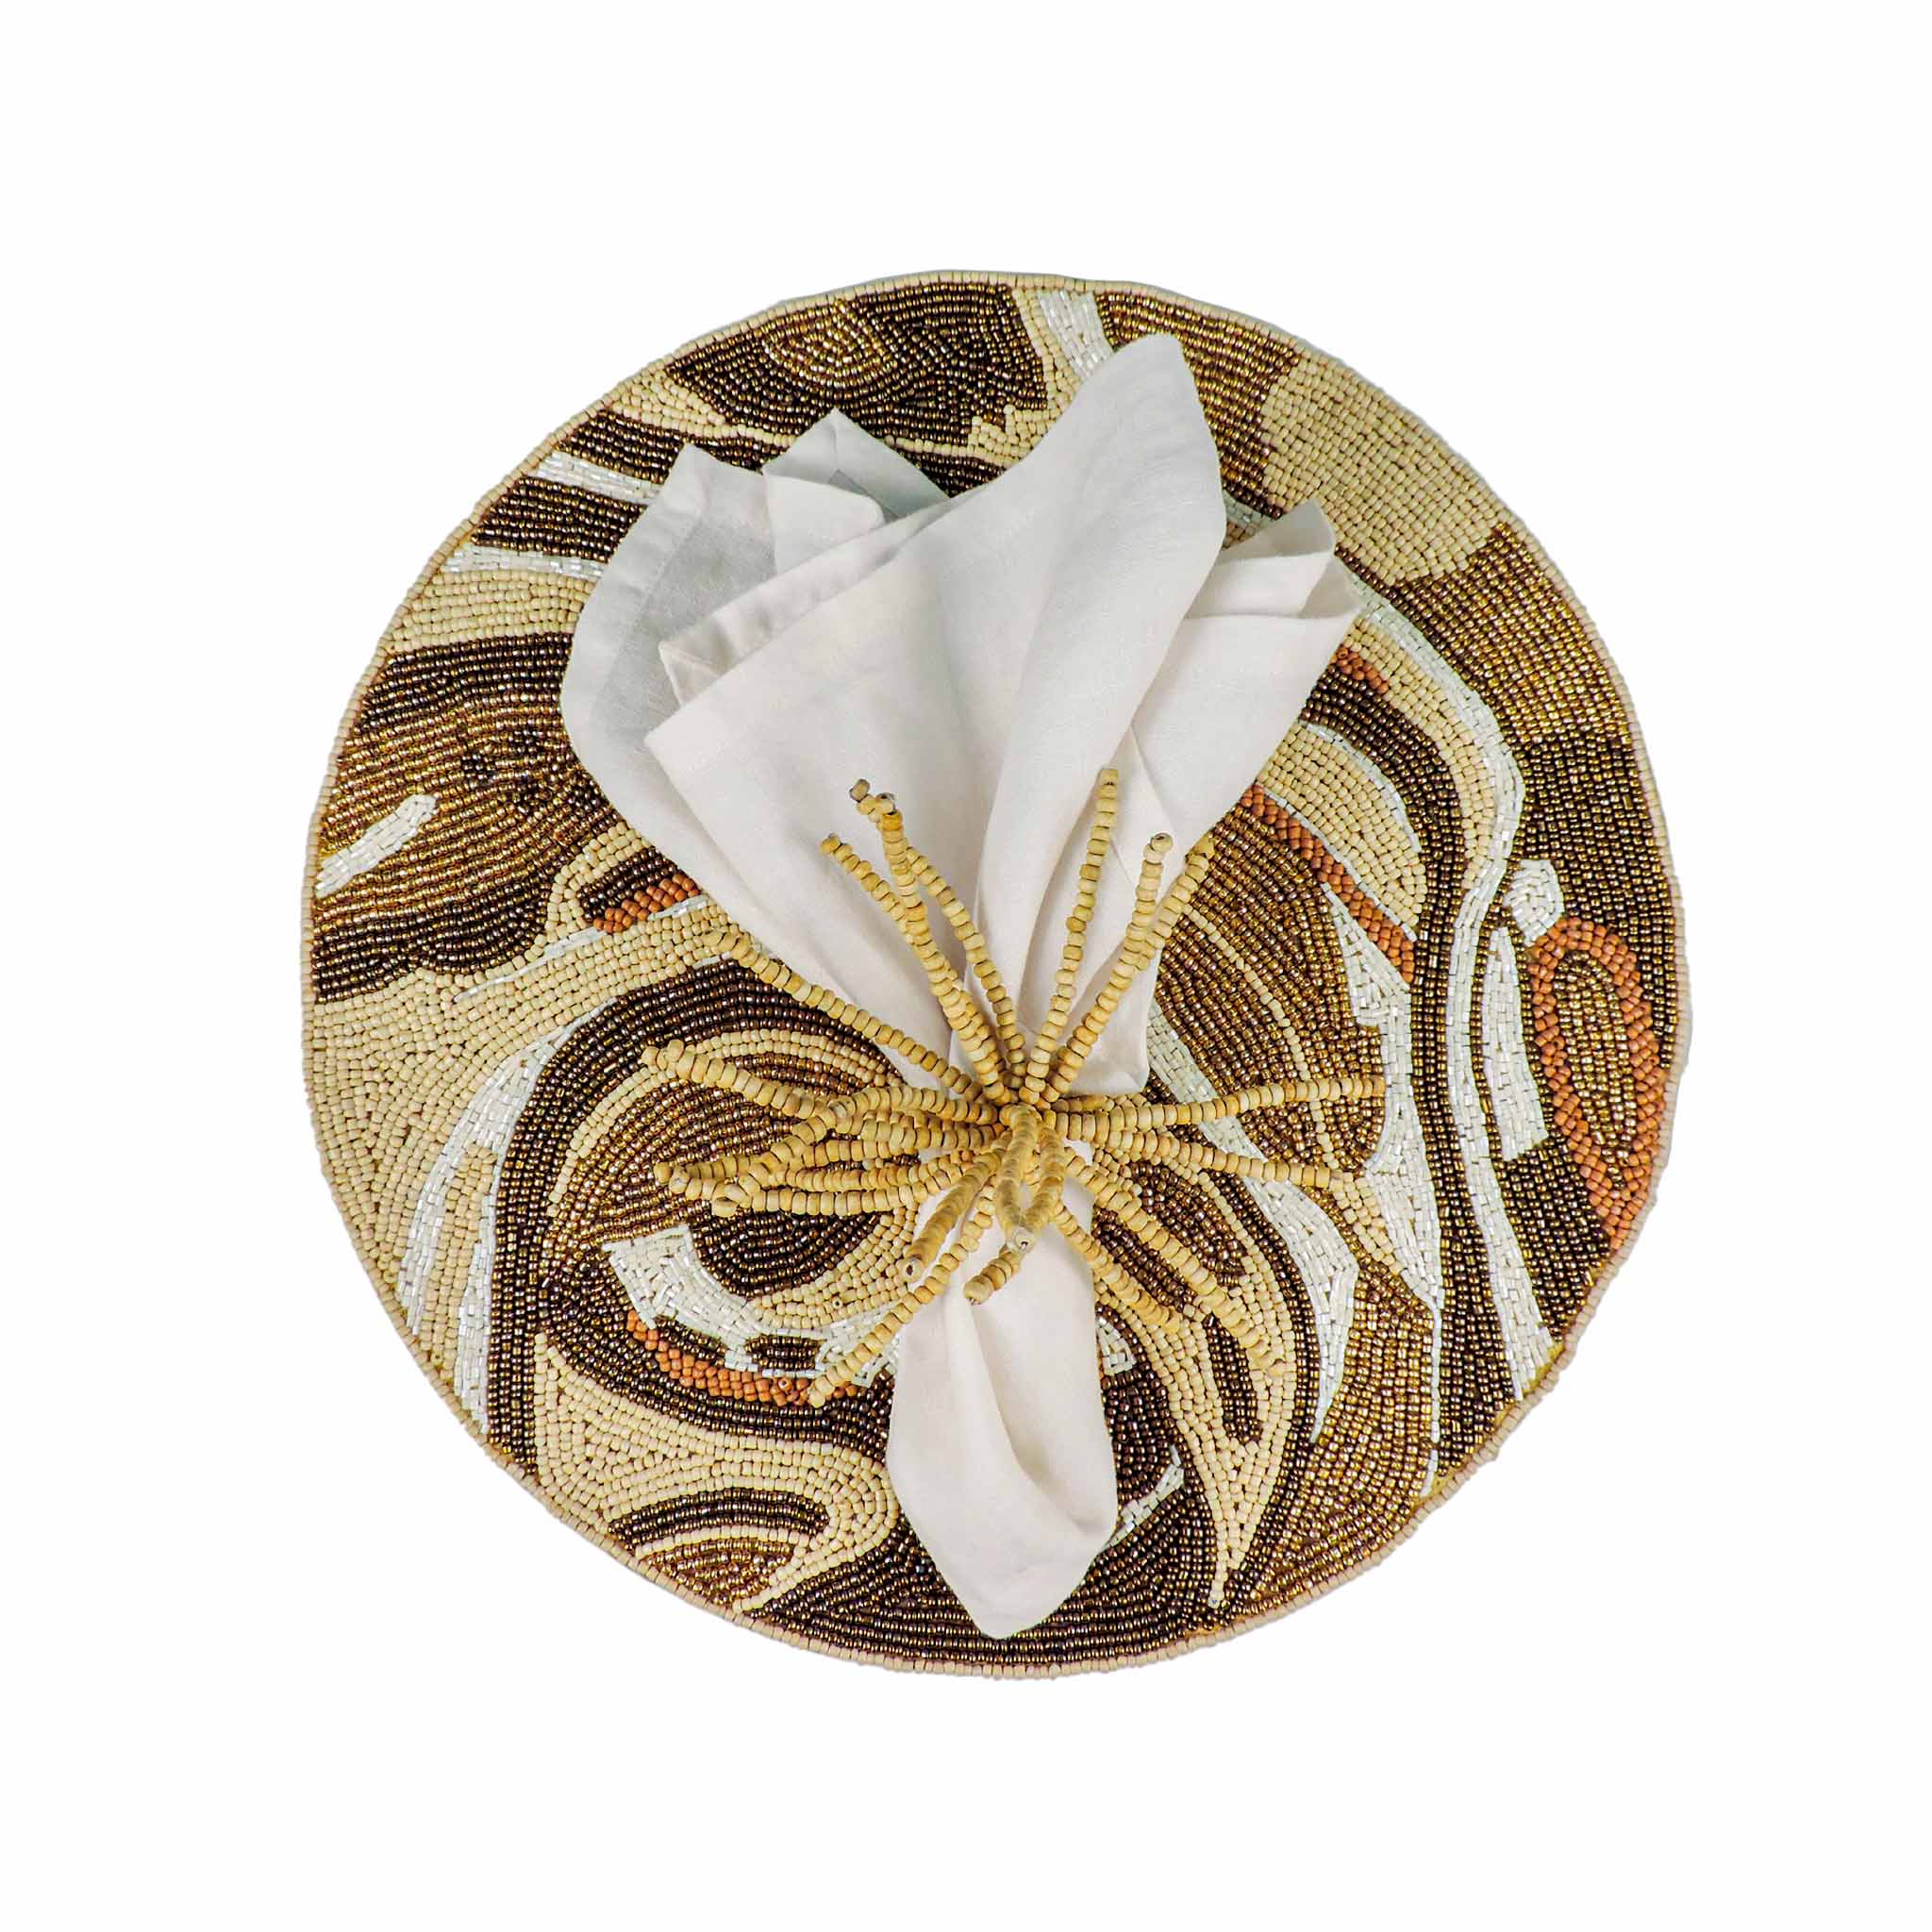 Modern Camo Glass Bead Embroidered Placemat in Tan & Brown, Set of 2/4